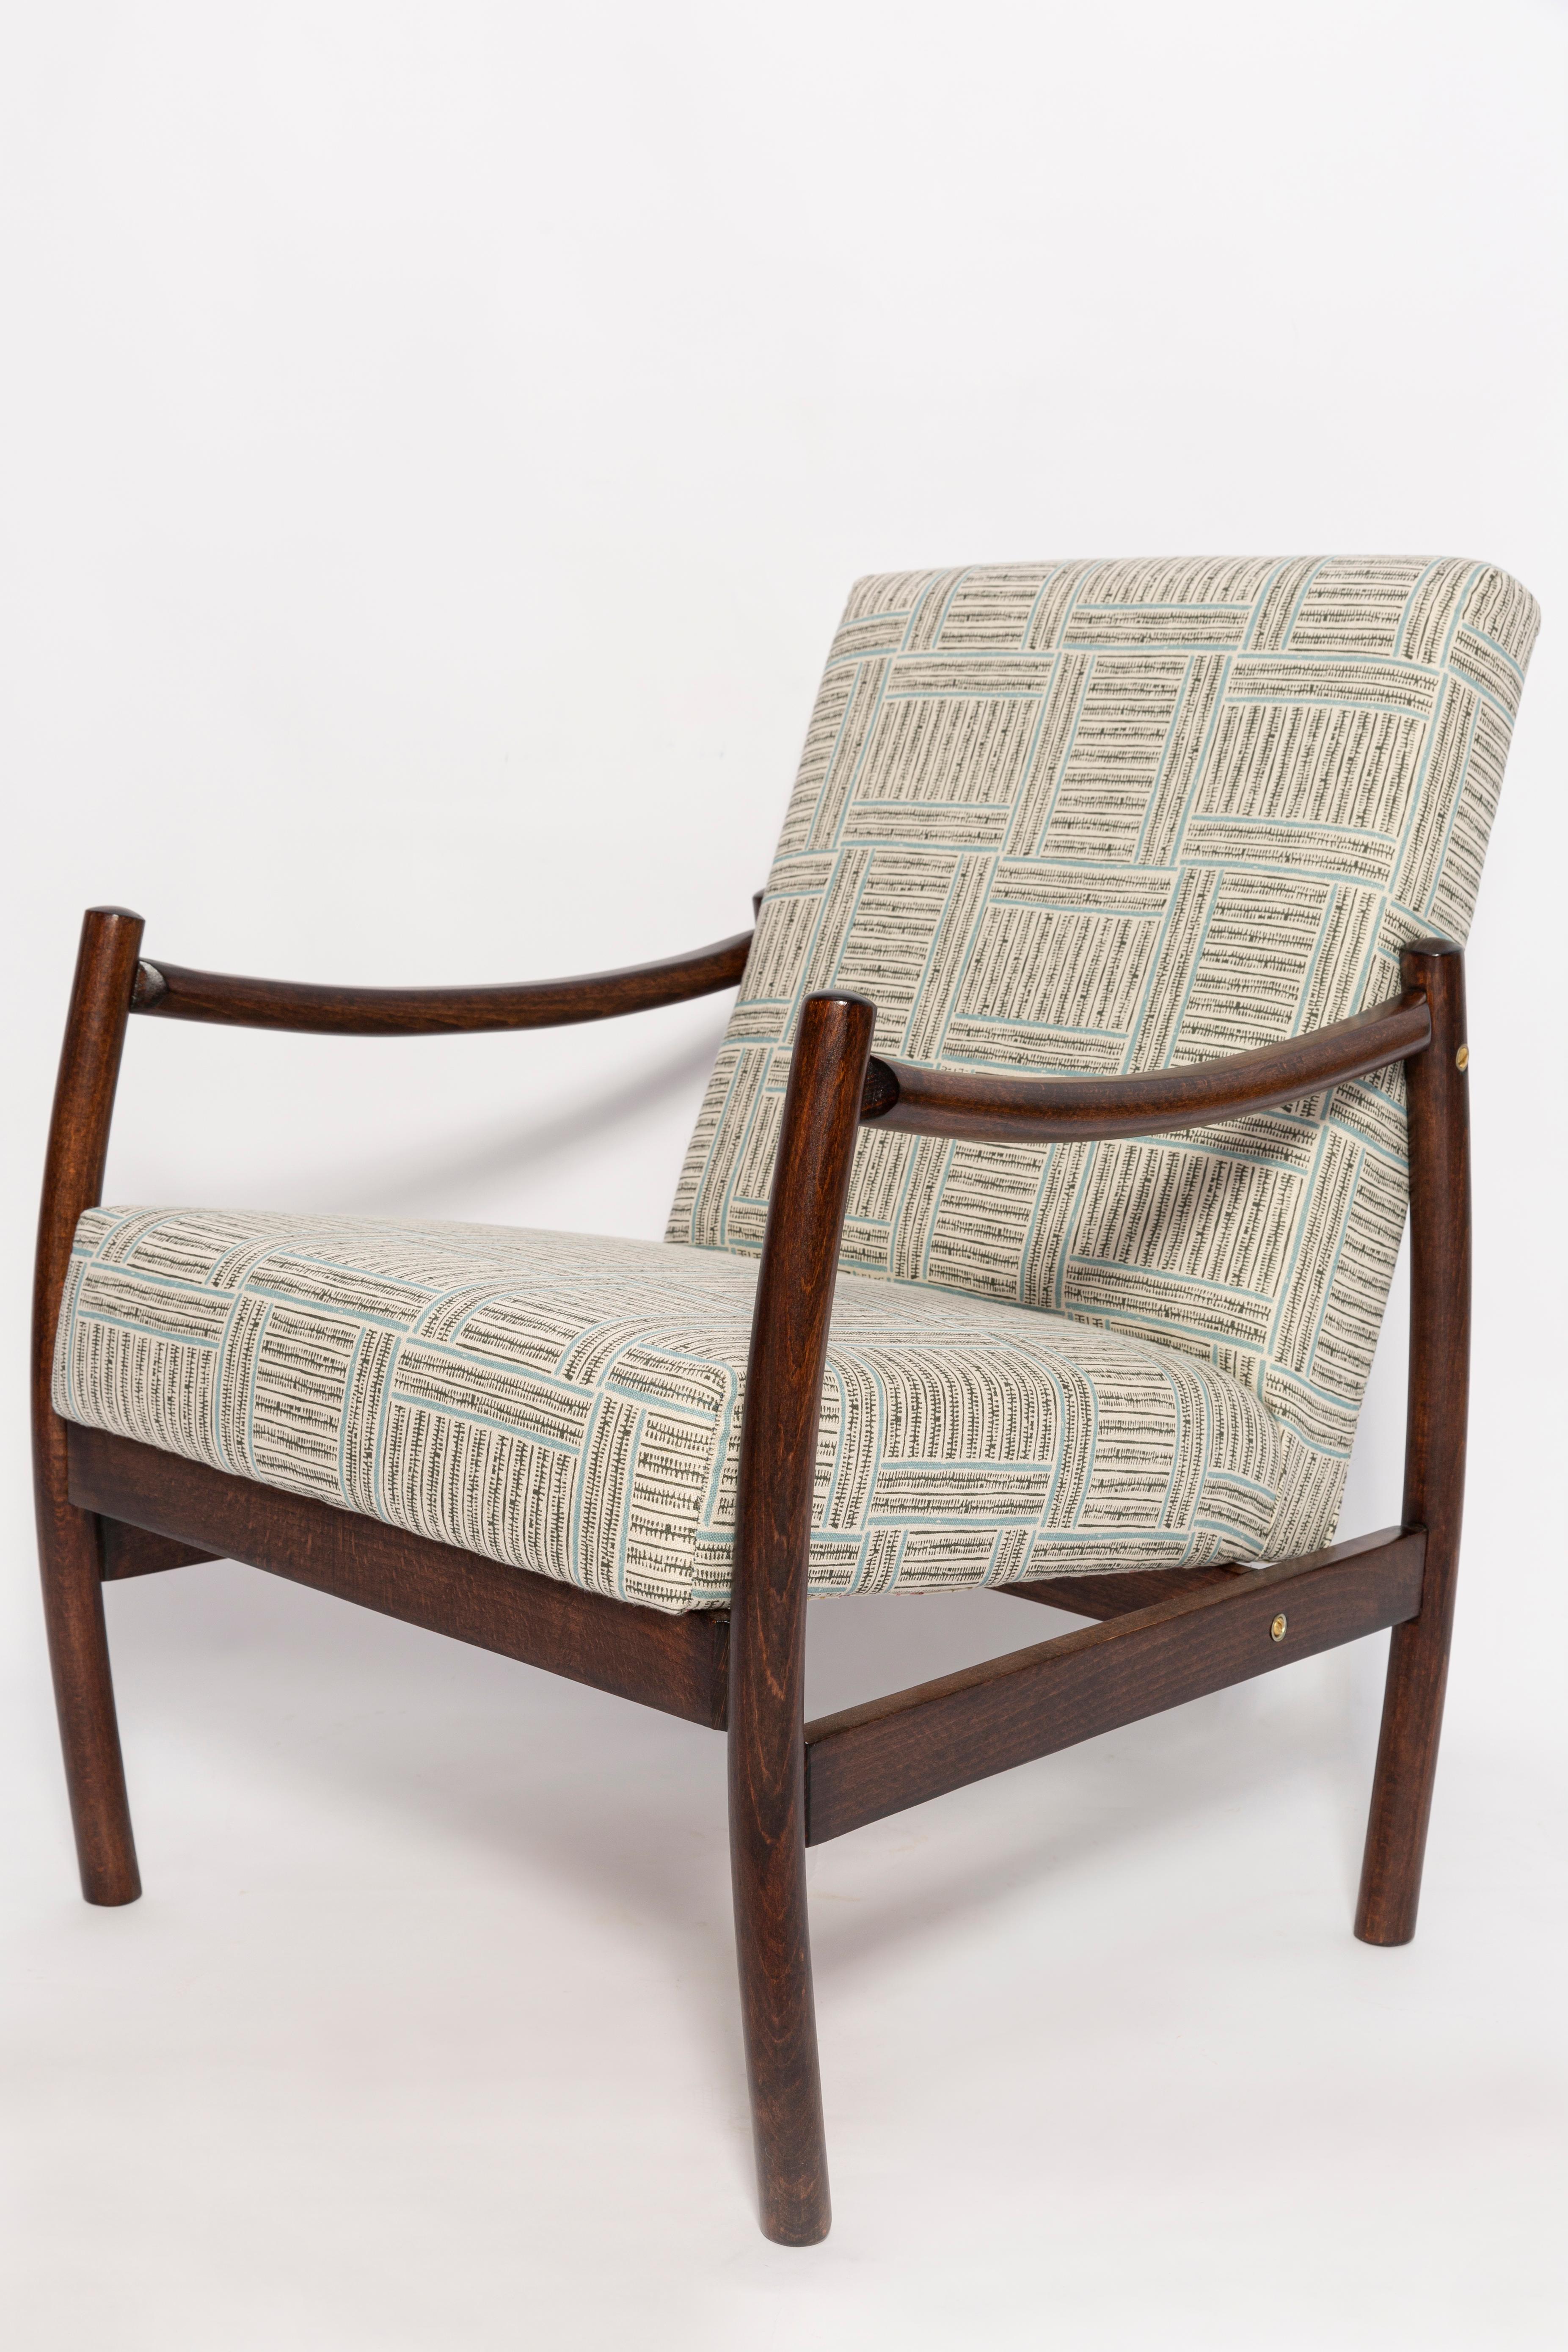 Pair of Mid Century Vintage Armchairs, Beige and Blue Linen, Europe, 1960s For Sale 3